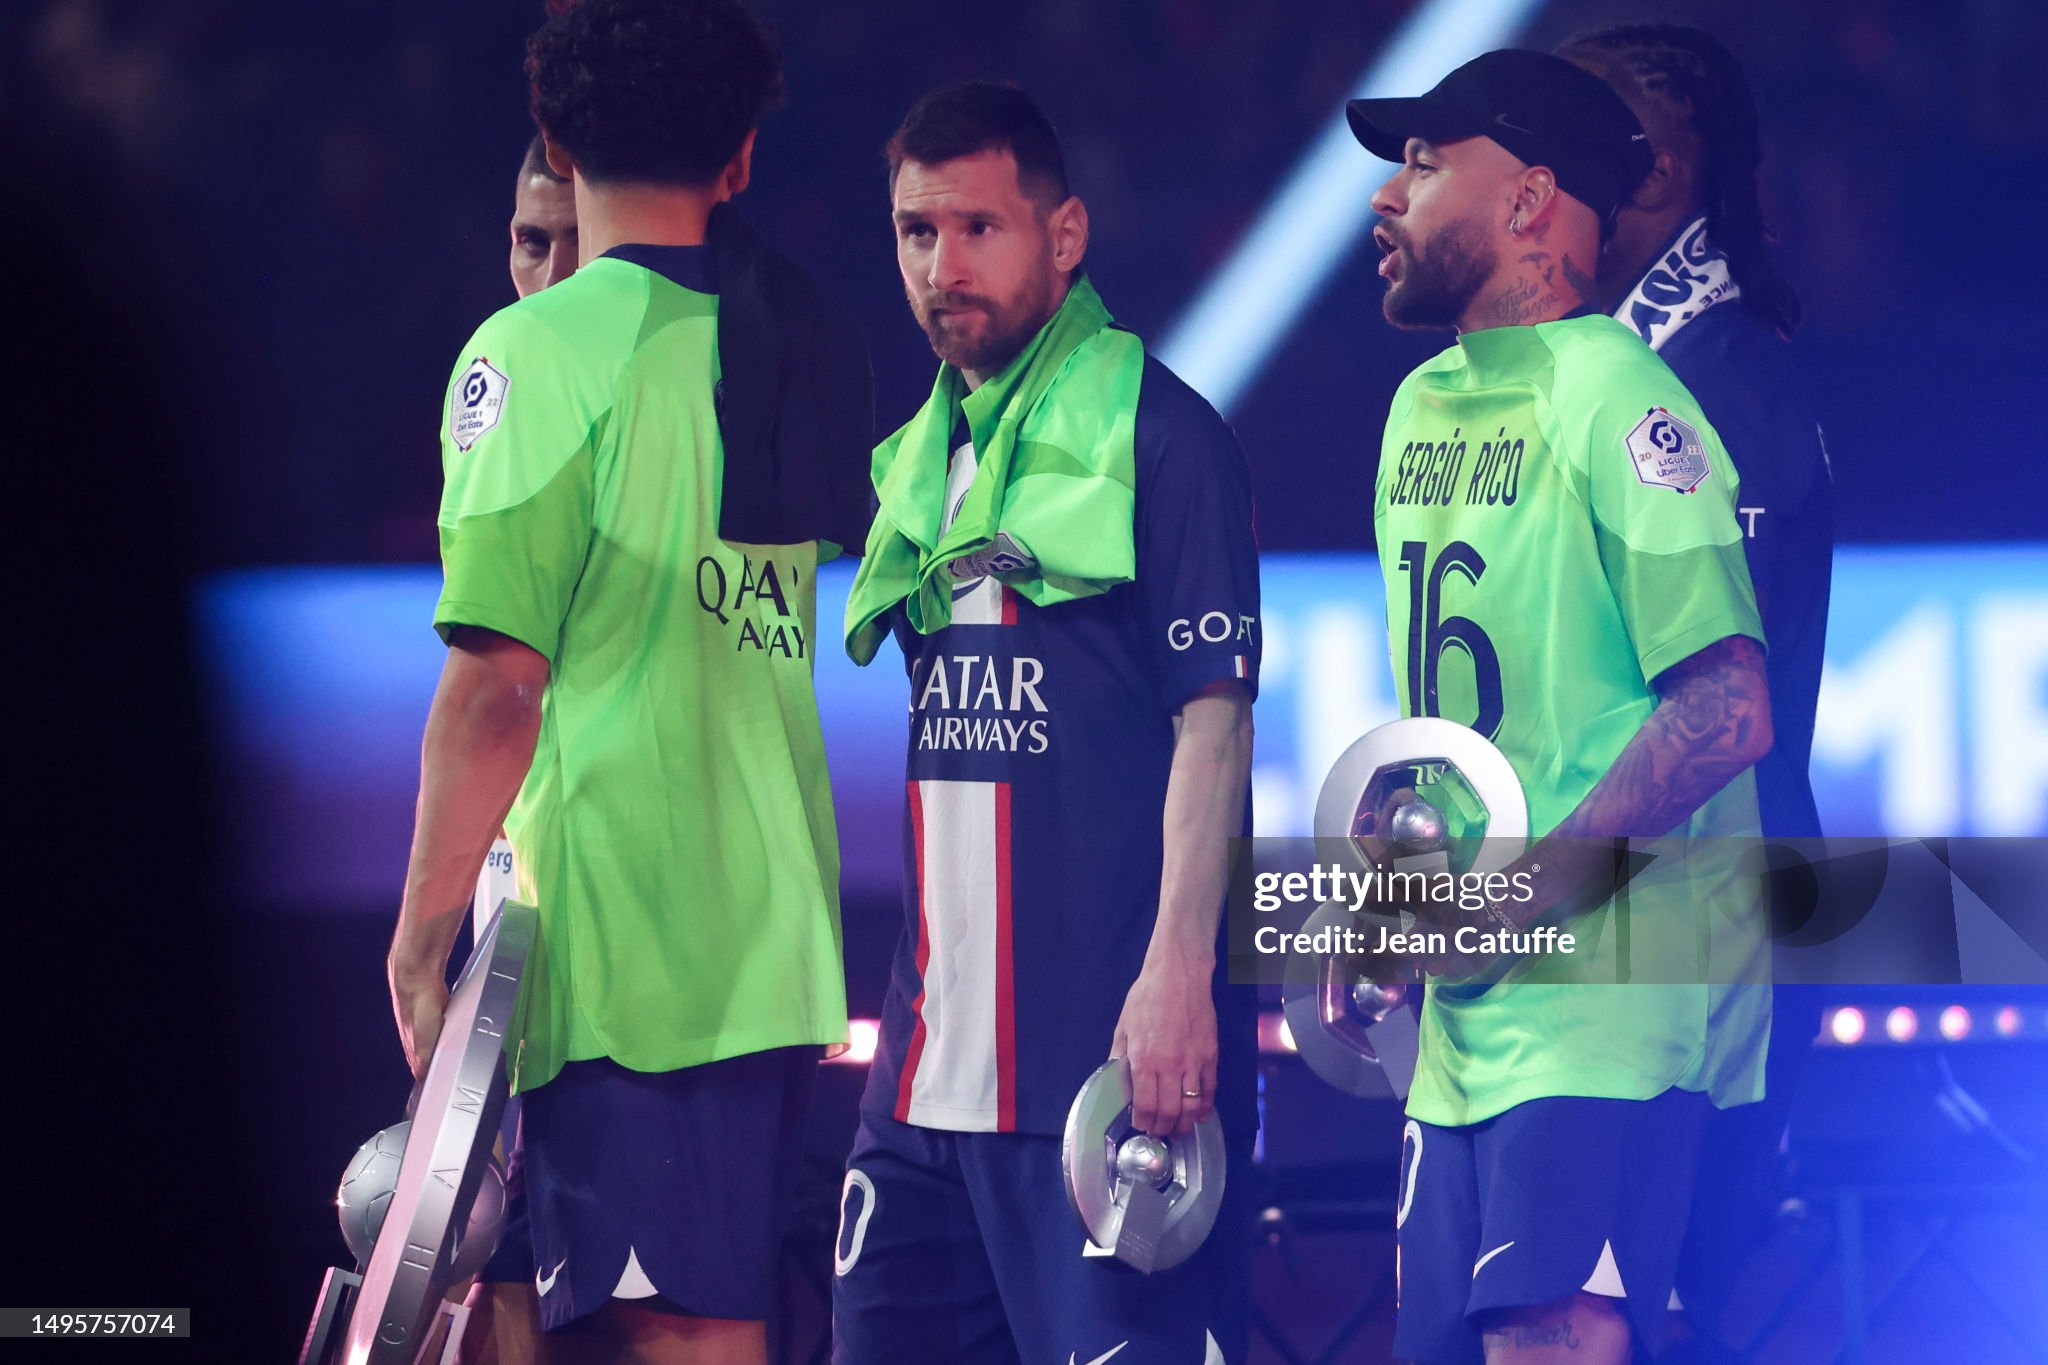 PSG boss reprimands Messi: 'A tribute in the stadium was sensitive'